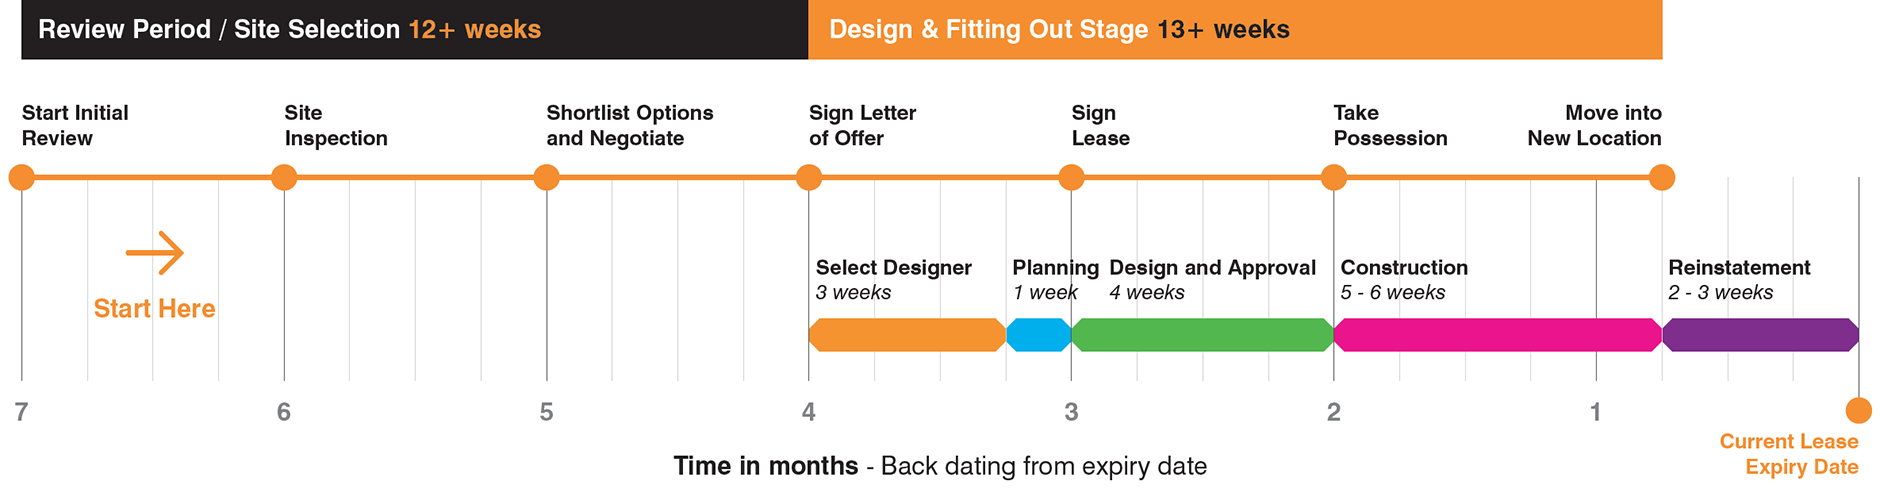 Project Timeline to move from lease expiry date including design and fitting out stage, site selection and review period of office spaces.